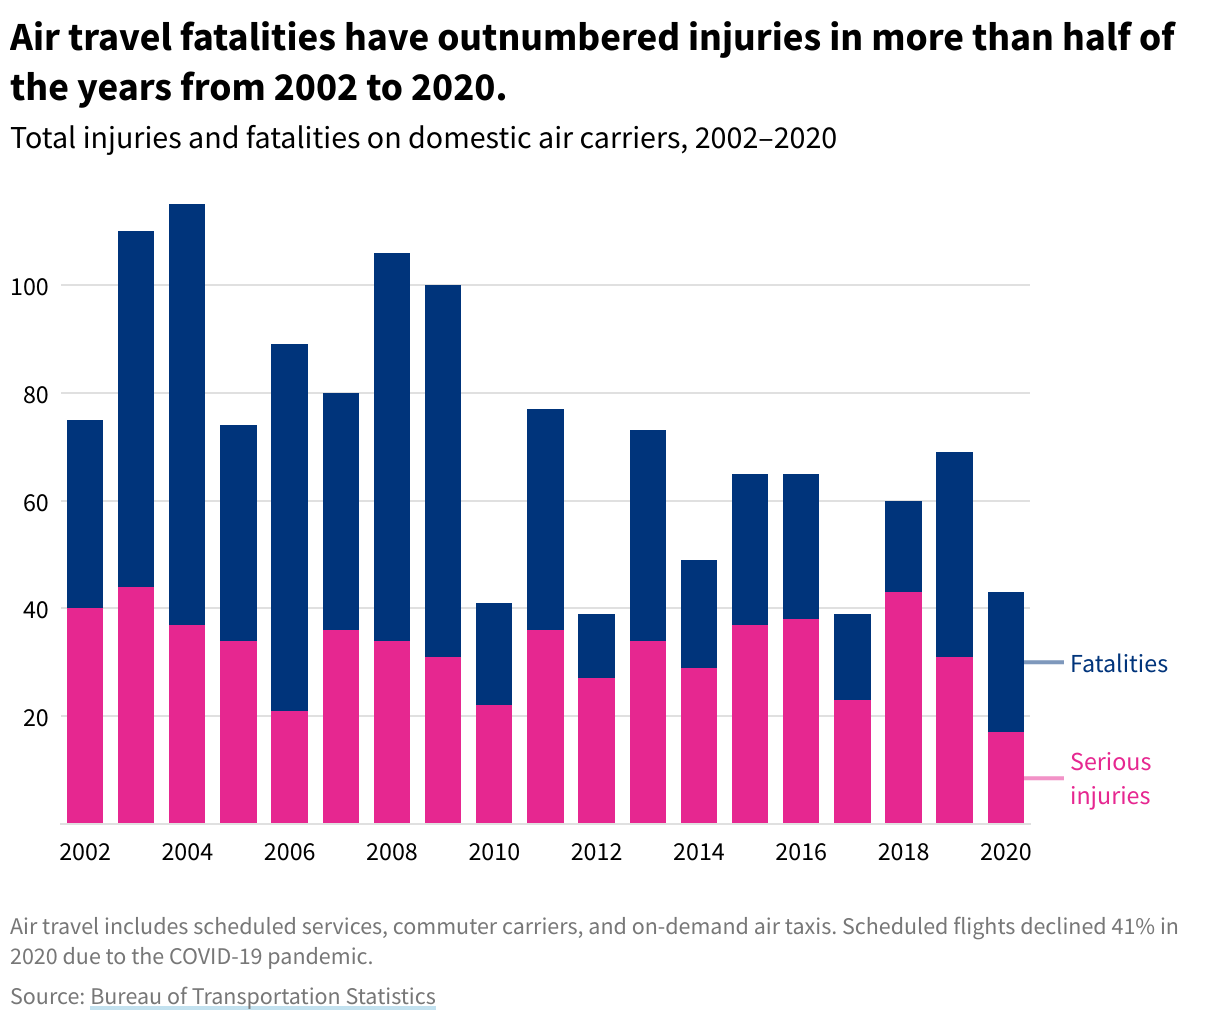 Stacked bar chart showing total injuries and fatalities on domestic air carriers from 2002 to 2020. 